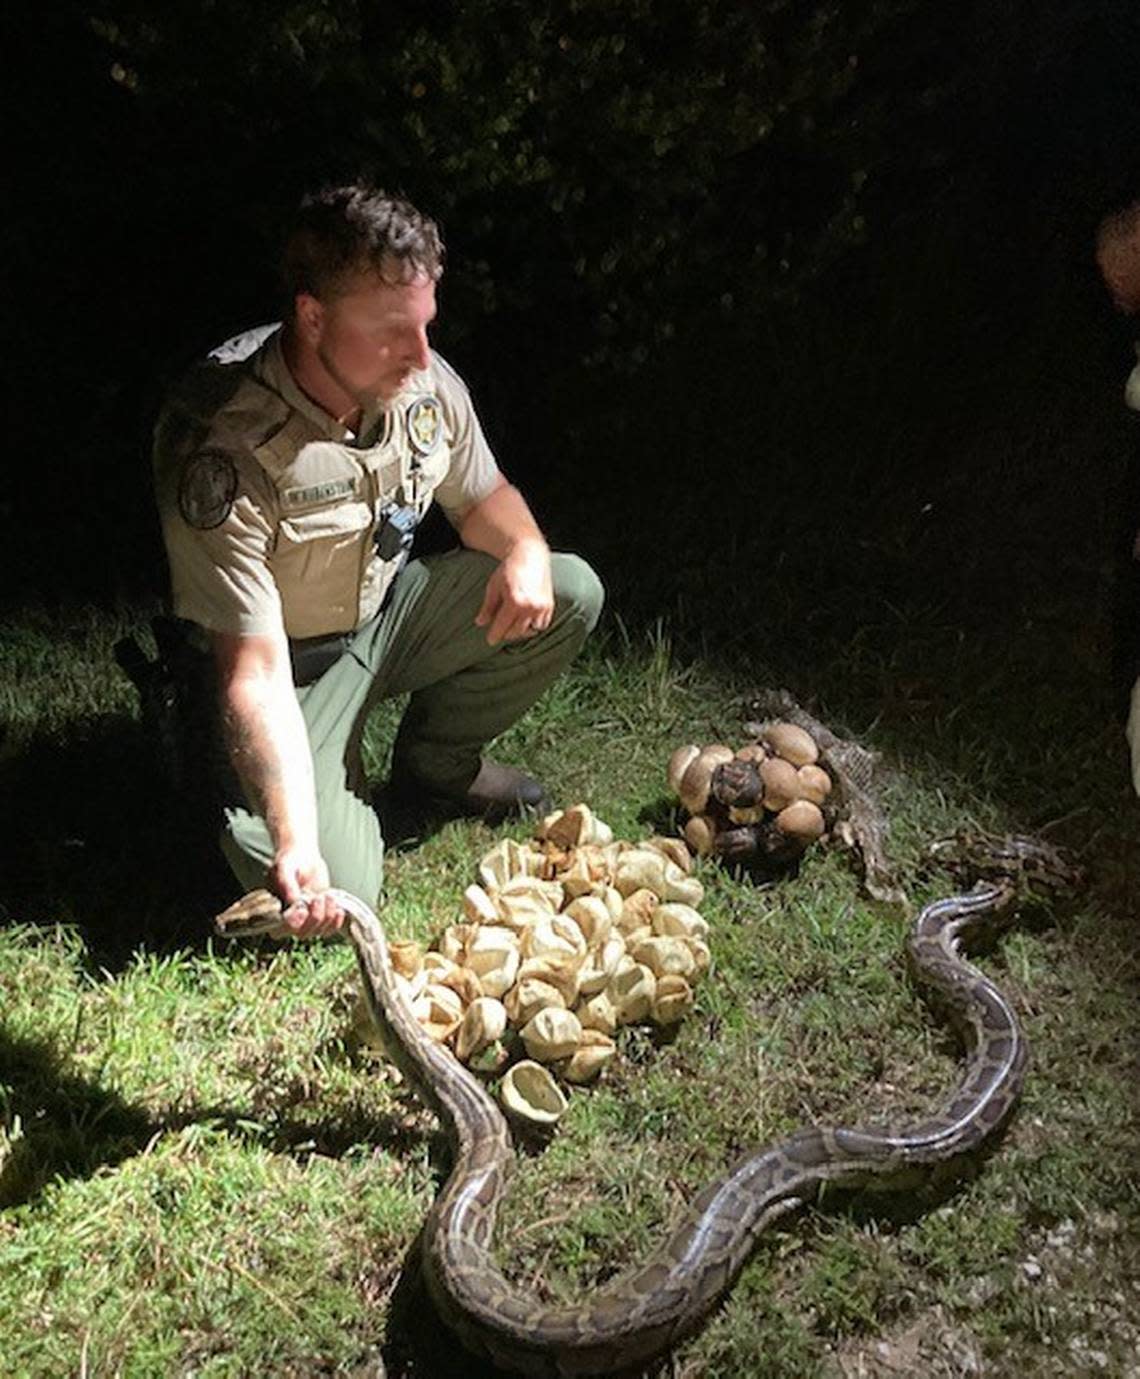 Florida Fish and Wildlife Conservation Commission Officer Matthew Rubenstein holds on to the neck of a 10-foot Burmese python in Big Cypress National Preserve Monday, July 11, 2022. Rubenstein is crouching by 23 unhatched snake eggs.